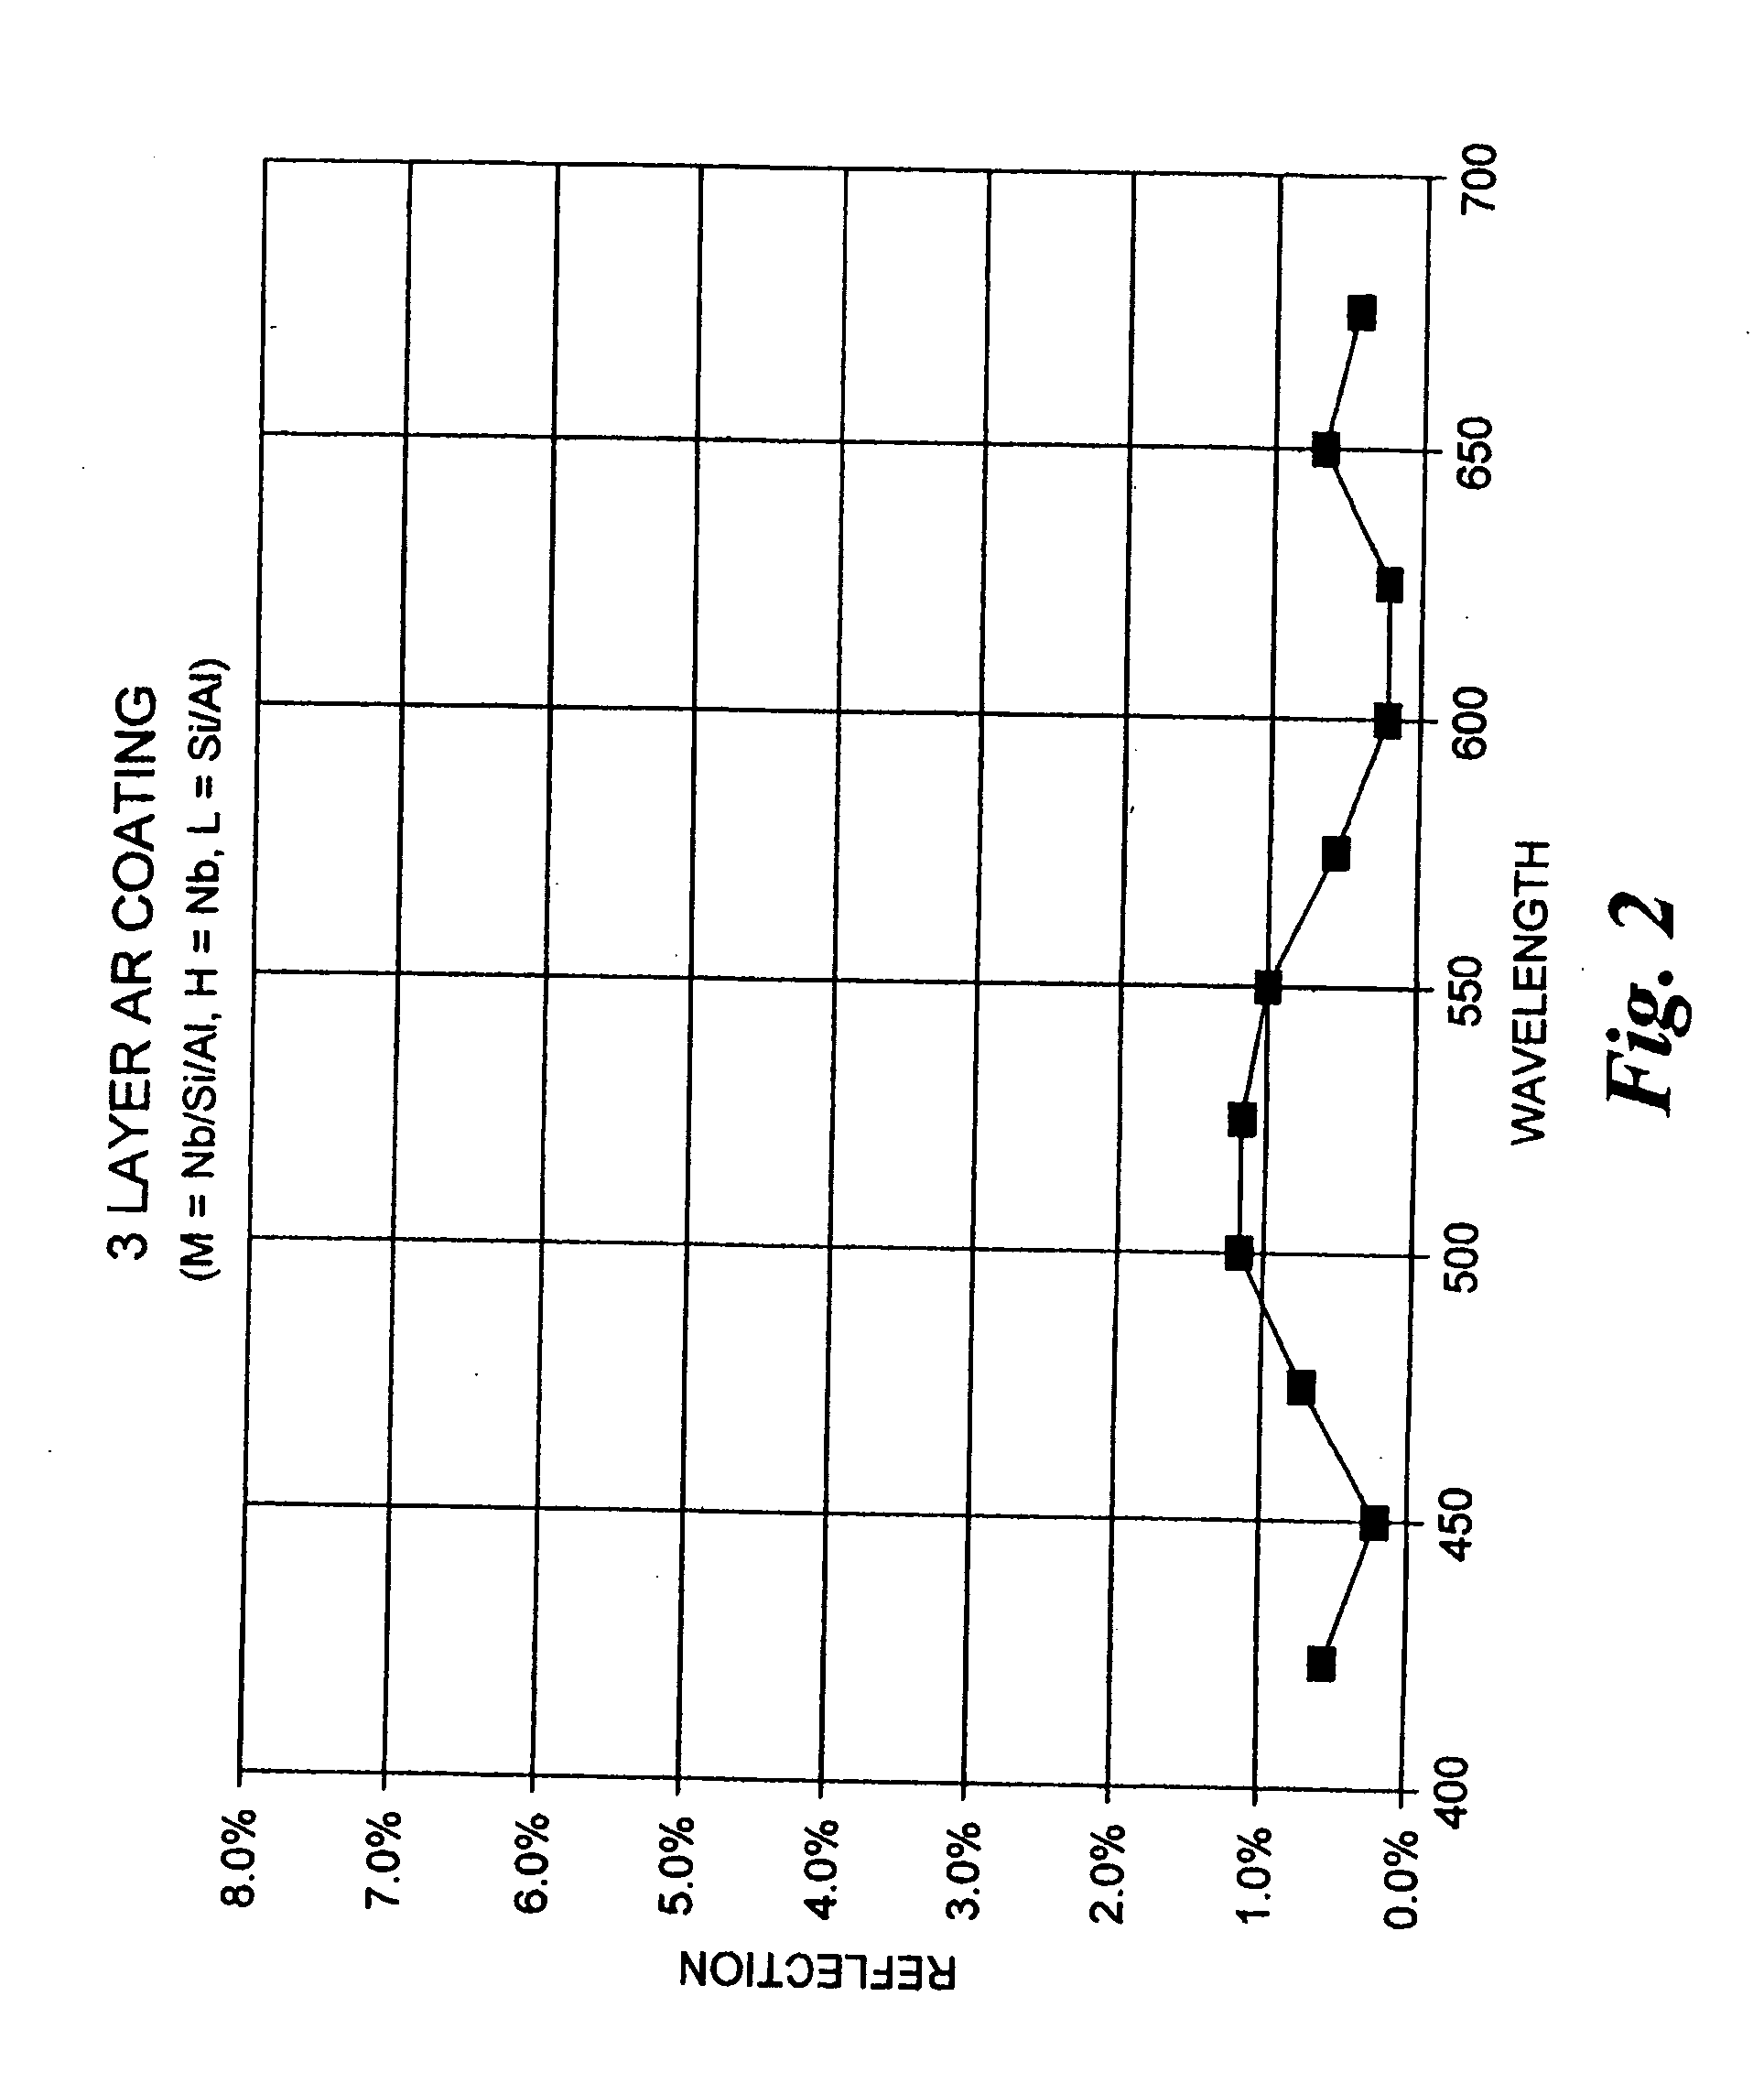 Niobium oxide-based layers for thin film optical coatings and processes for producing the same